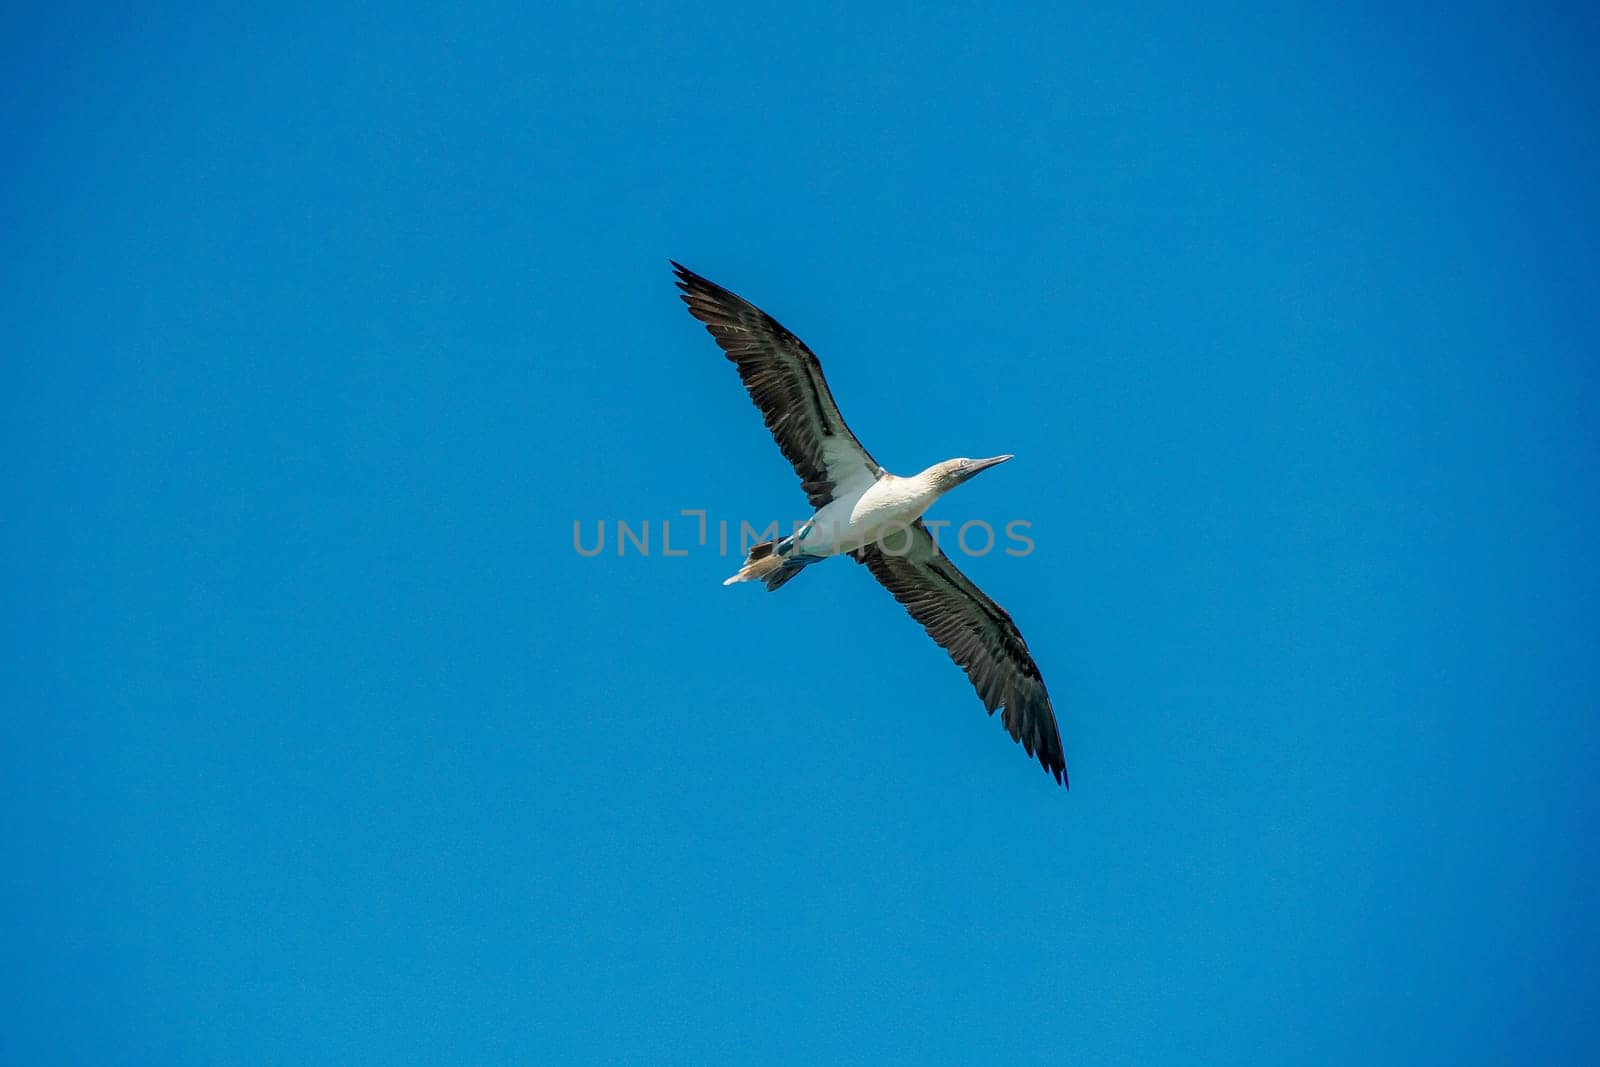 Flying Blue-footed Booby (Sula nebouxii) on rocks, coming from Galapagos Islands Ecuador to Baja California Sur, Mexico